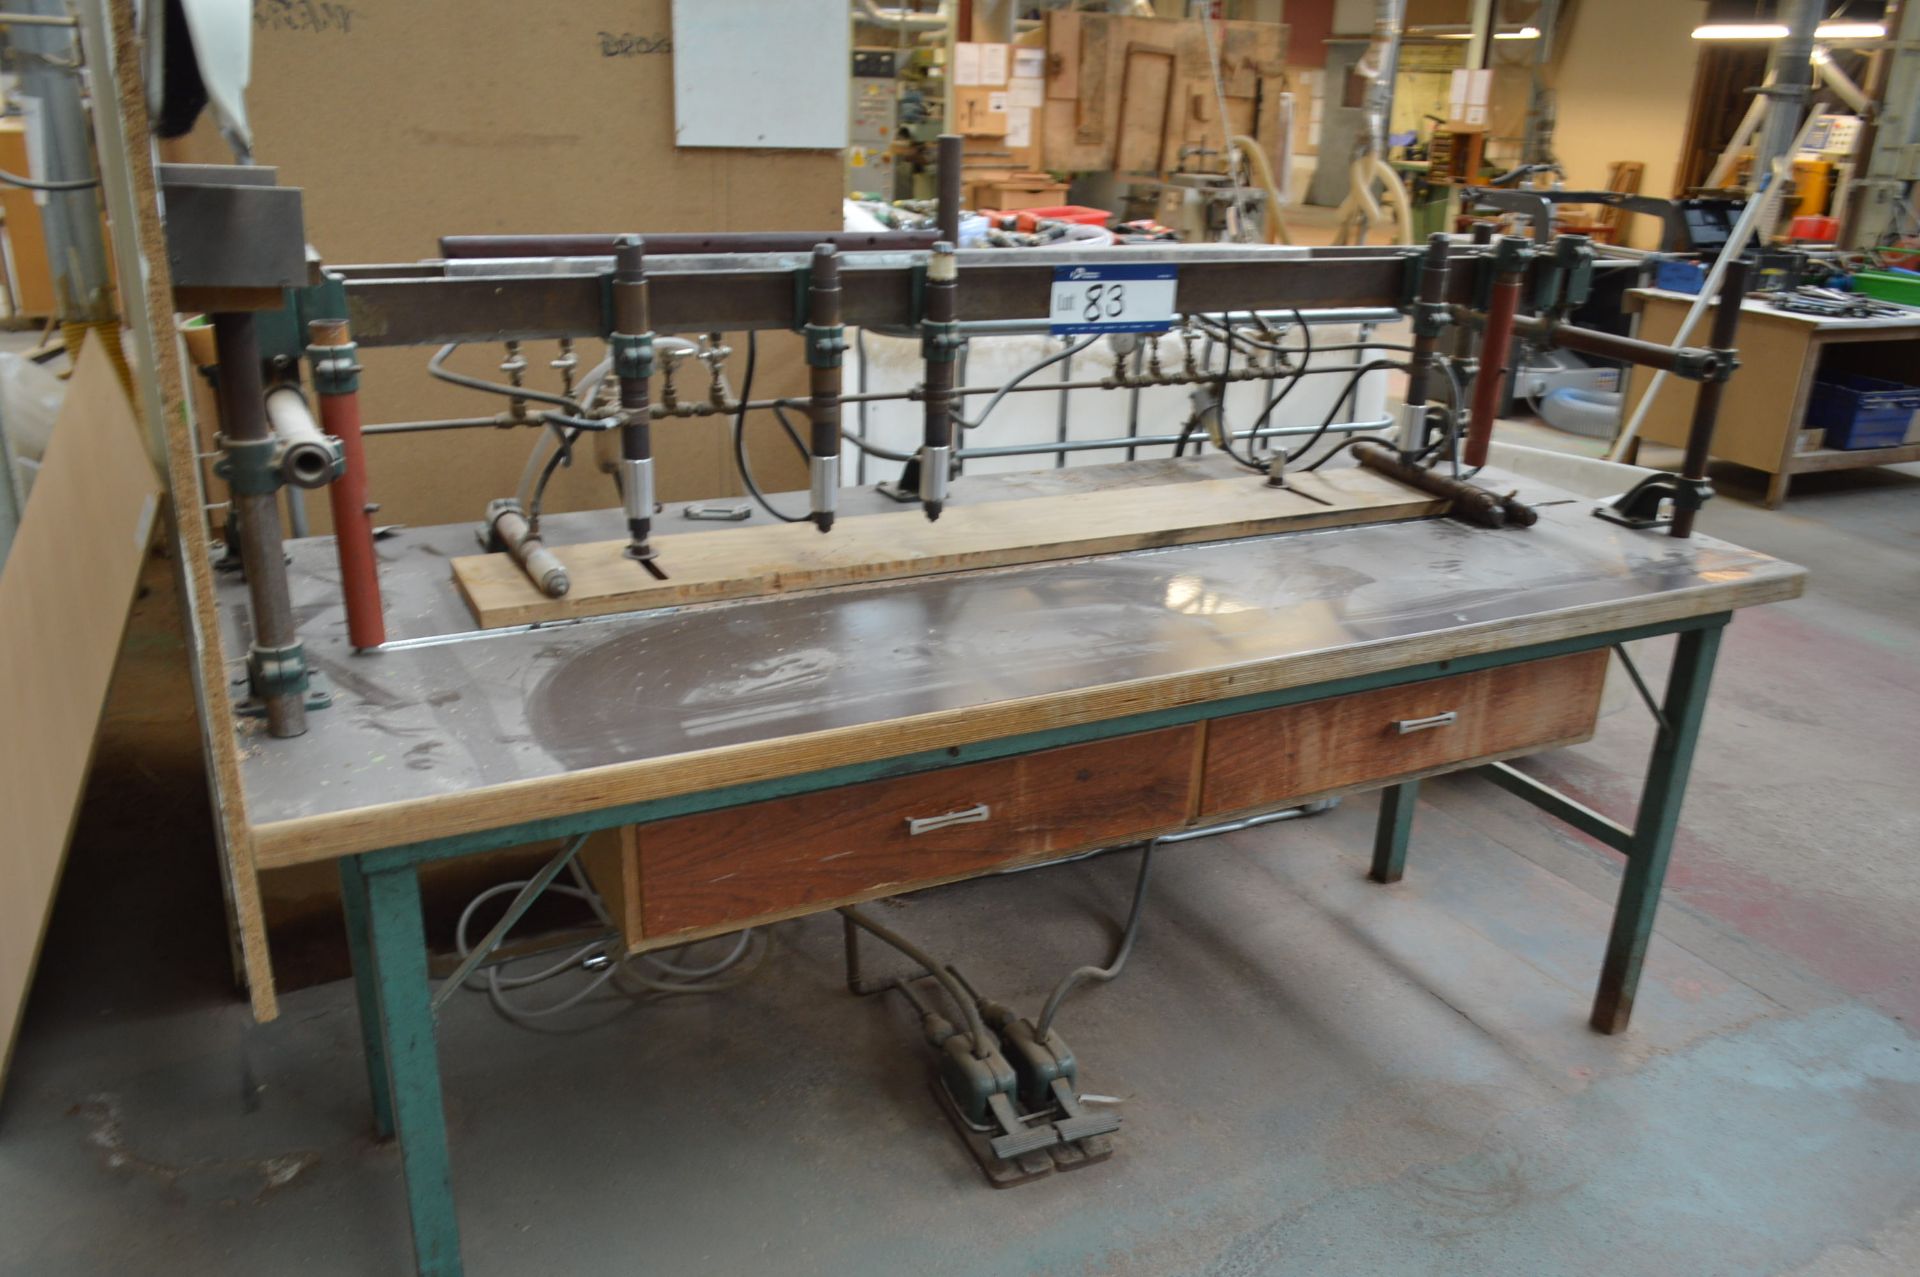 Drilling Jig, with bench